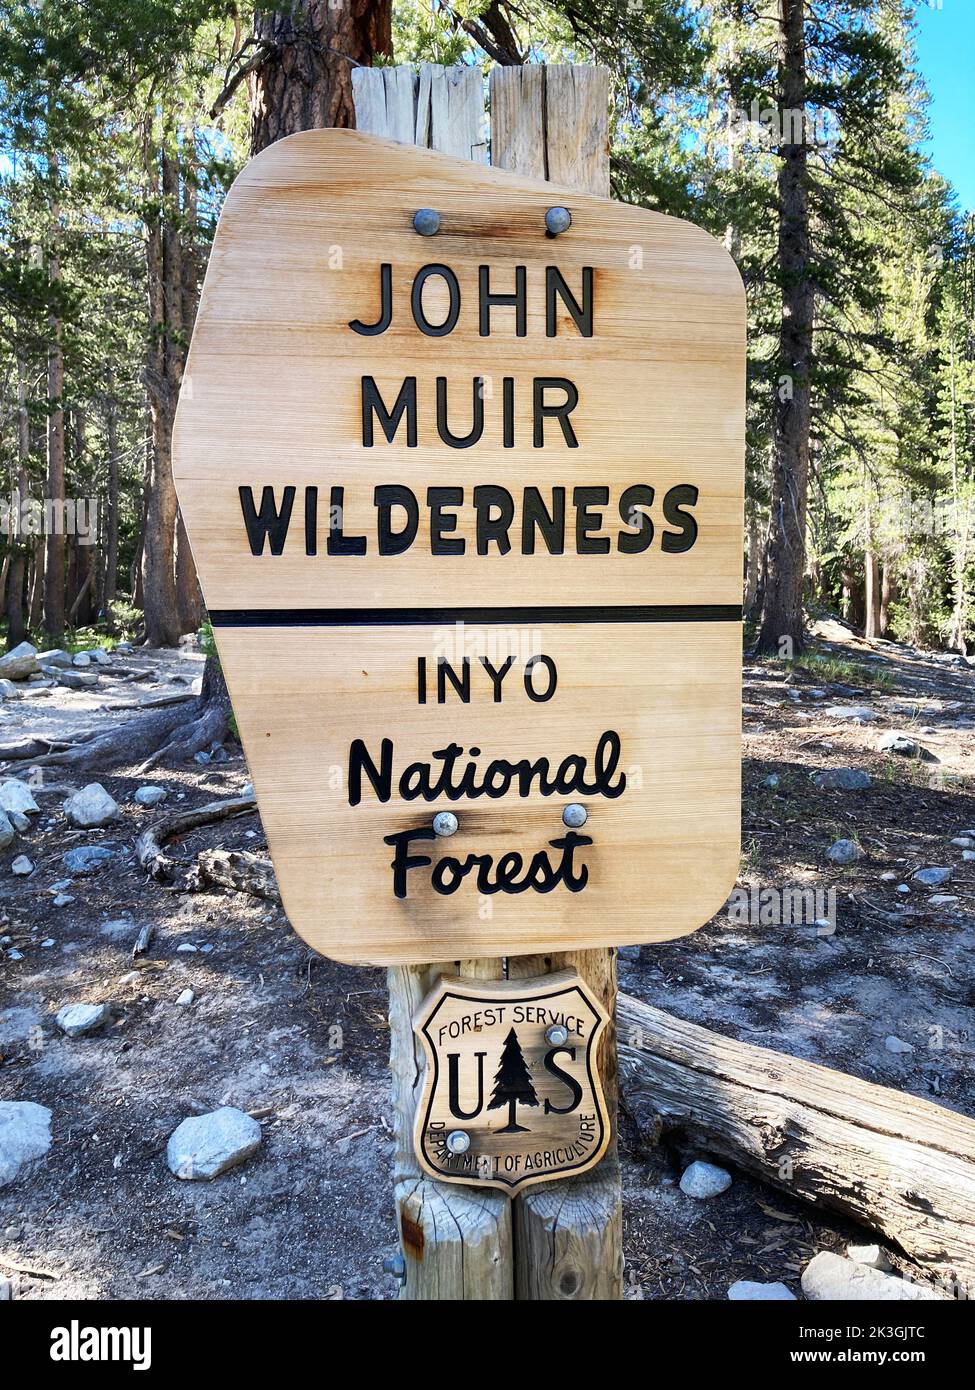 John Muir Wilderness sign on hiking trail at Inyo National Forest - California, USA - July, 2022 Stock Photo